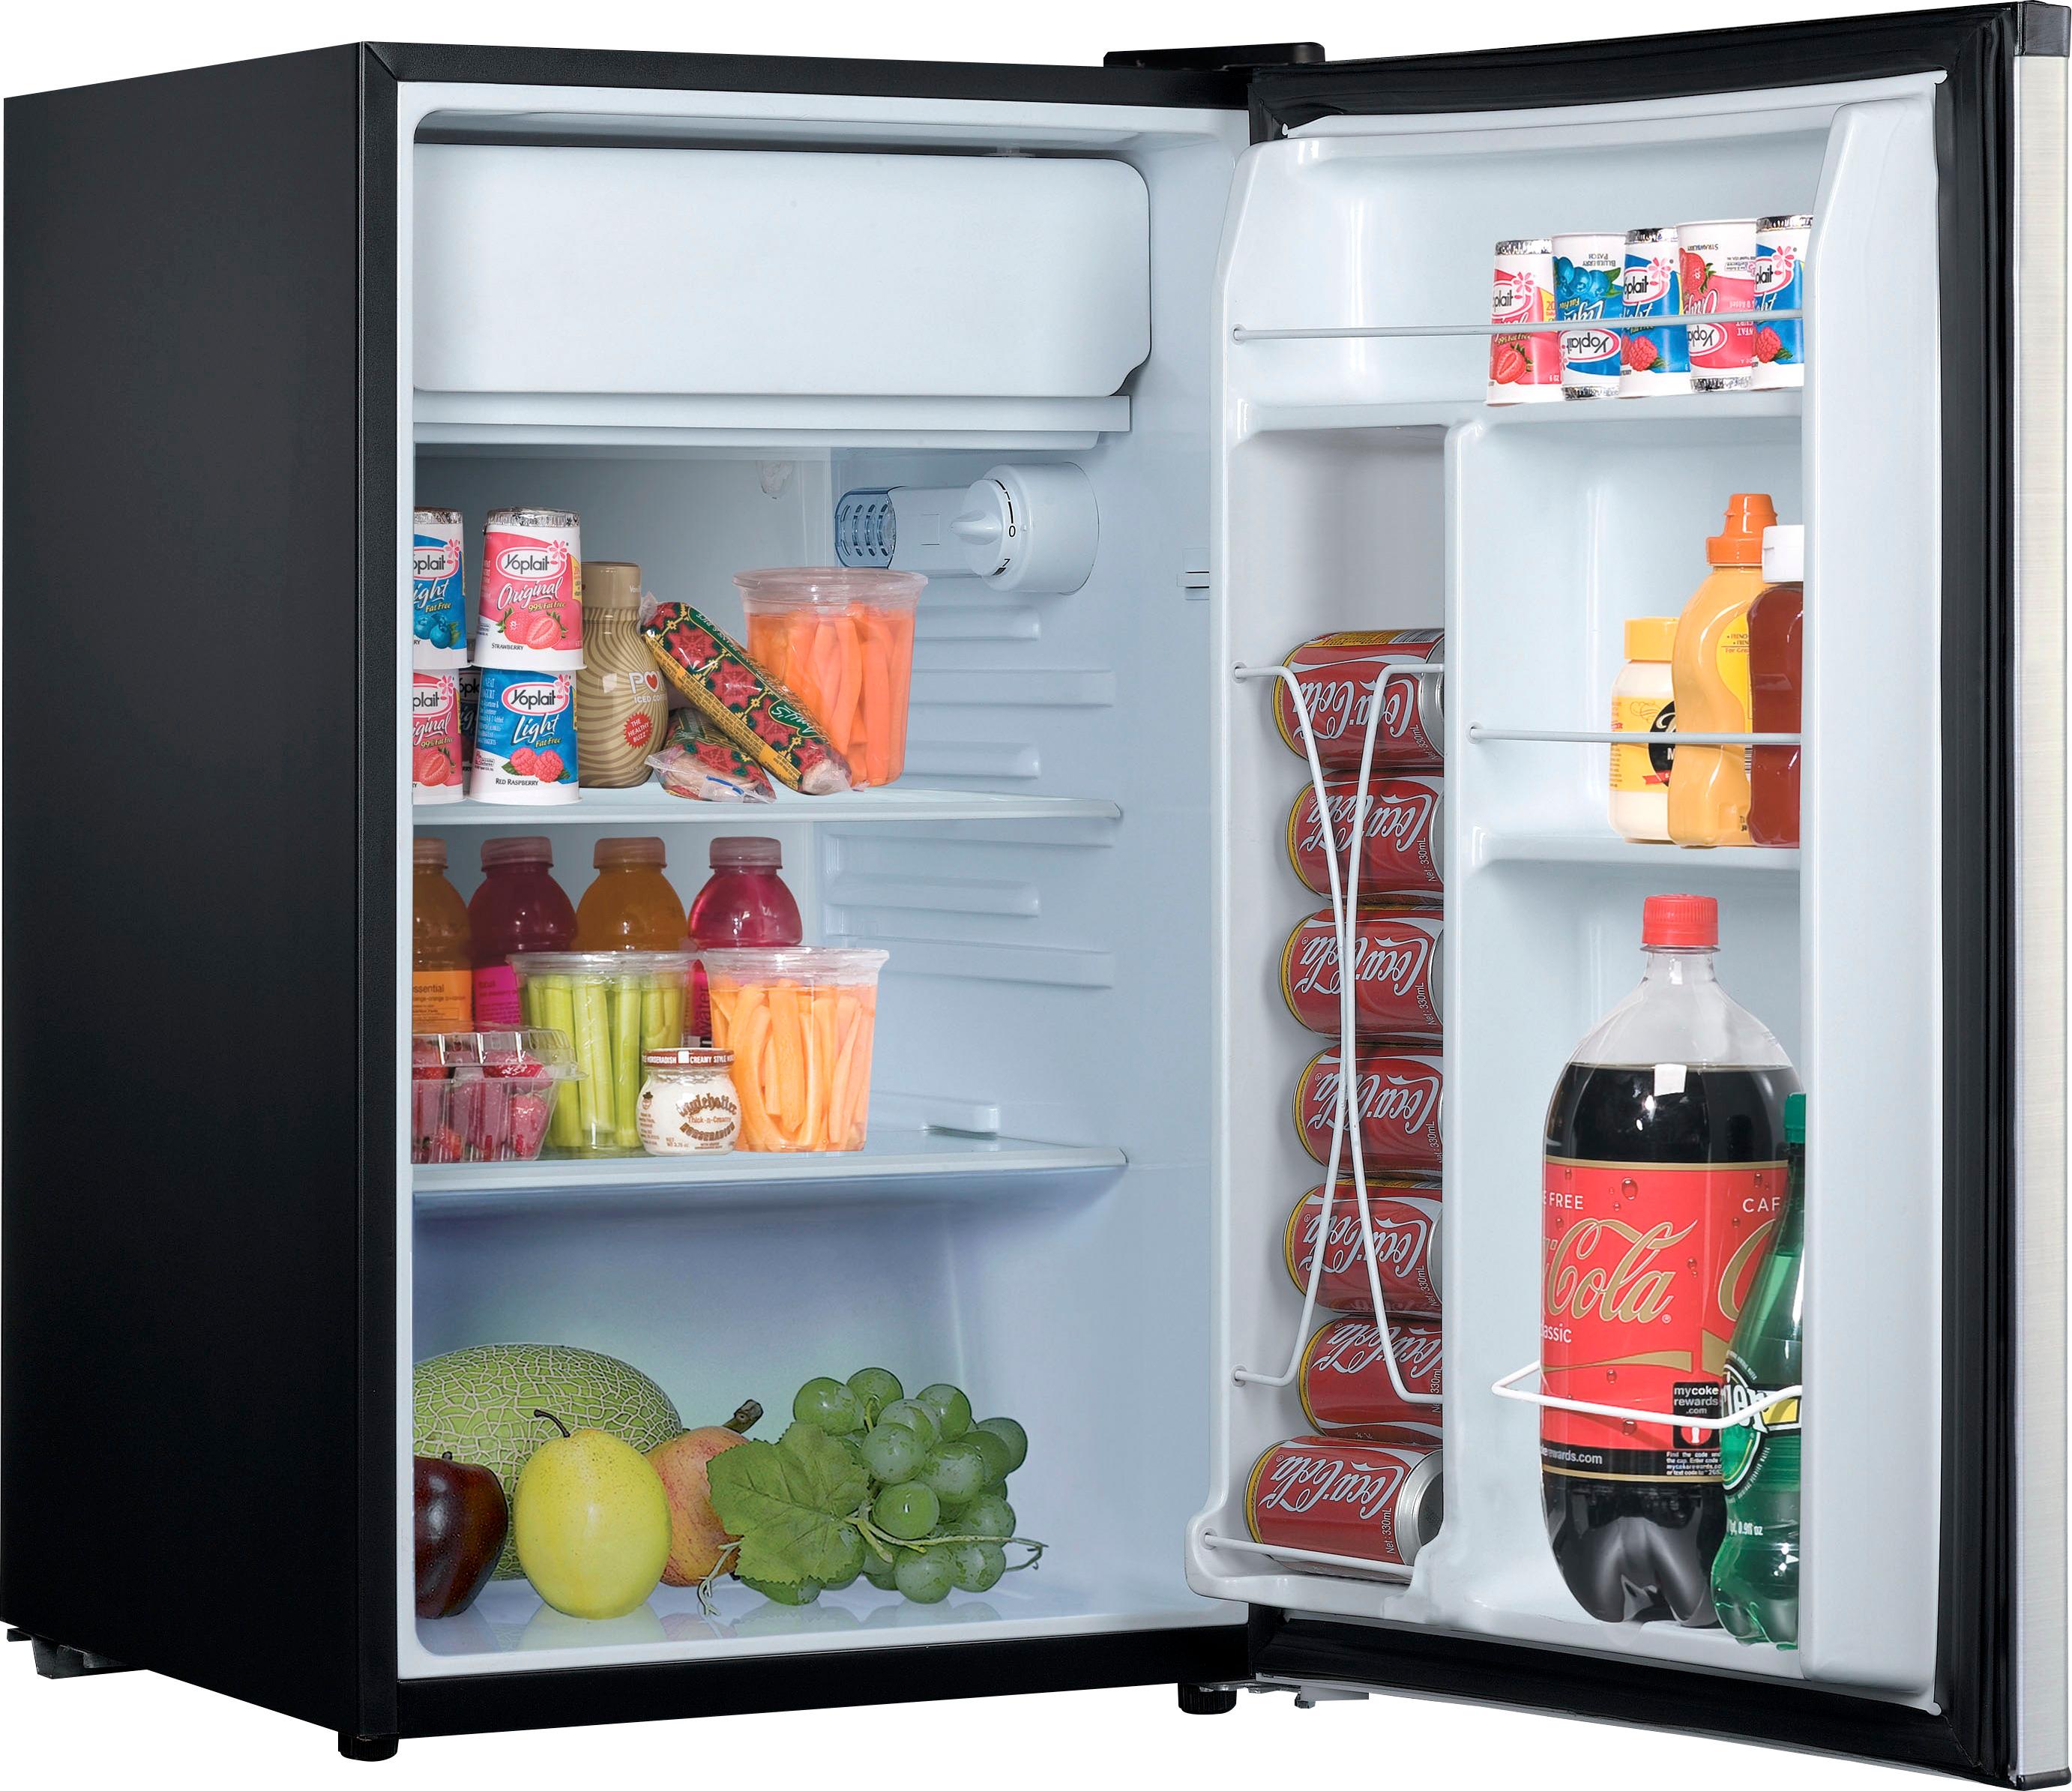  Whirlpool 2.7 cu ft Mini Refrigerator - Stainless Steel -  WH27S1E : Home & Kitchen